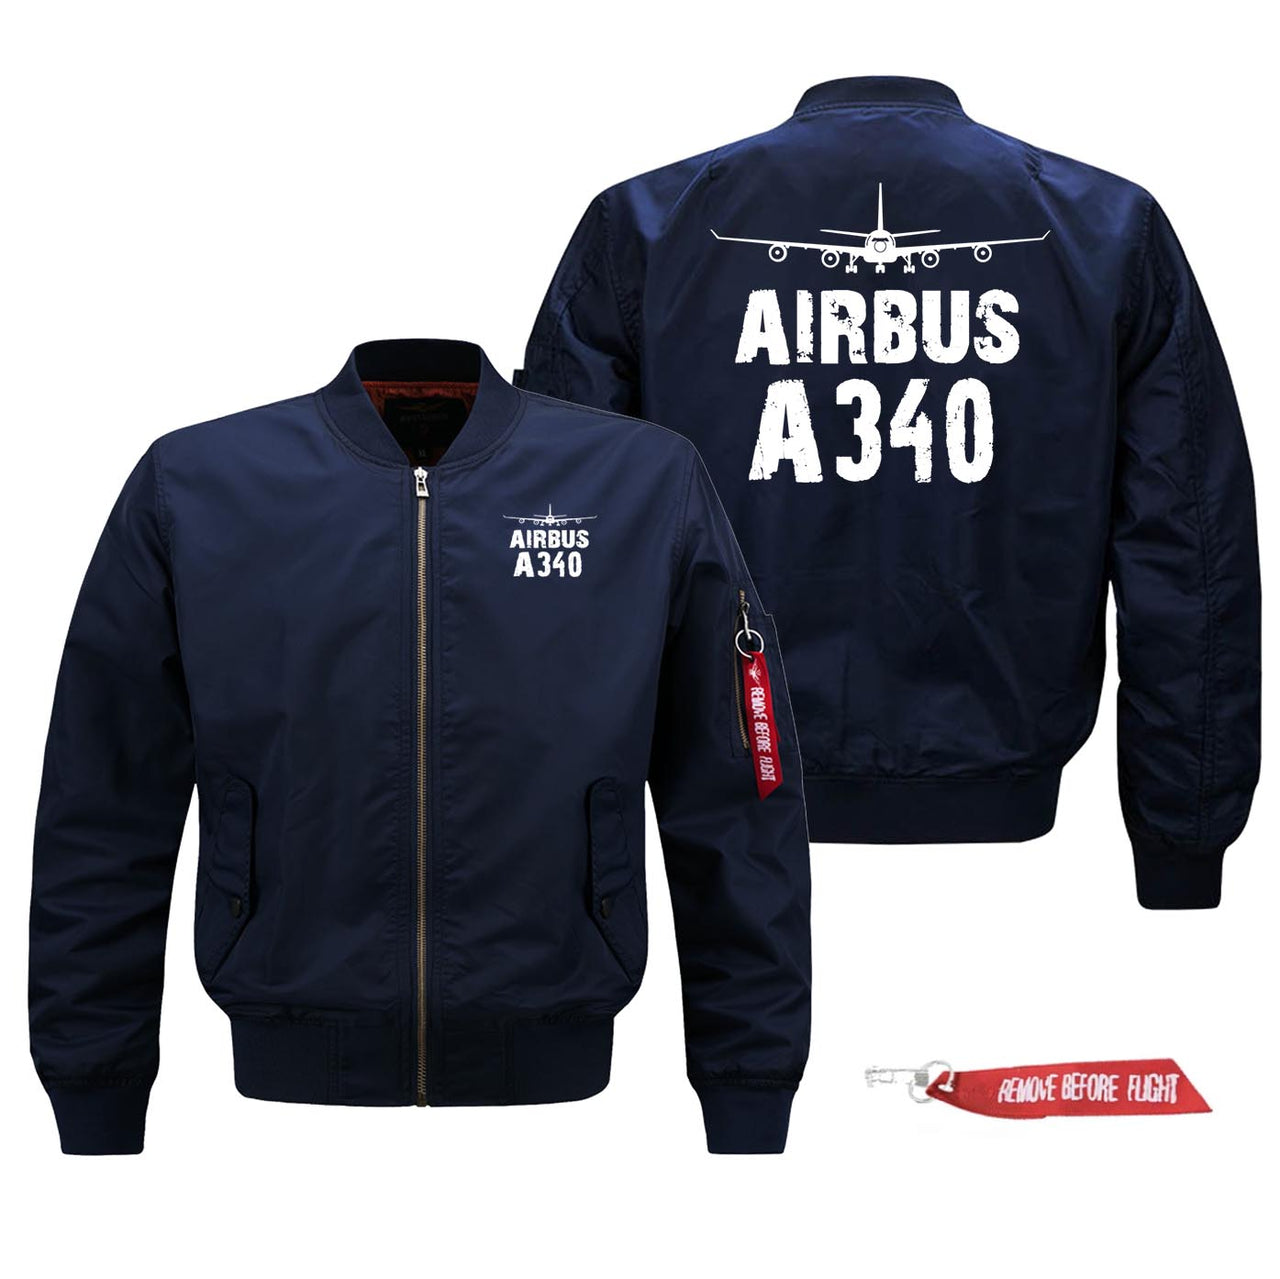 Airbus A340 Silhouette & Designed Pilot Jackets (Customizable)